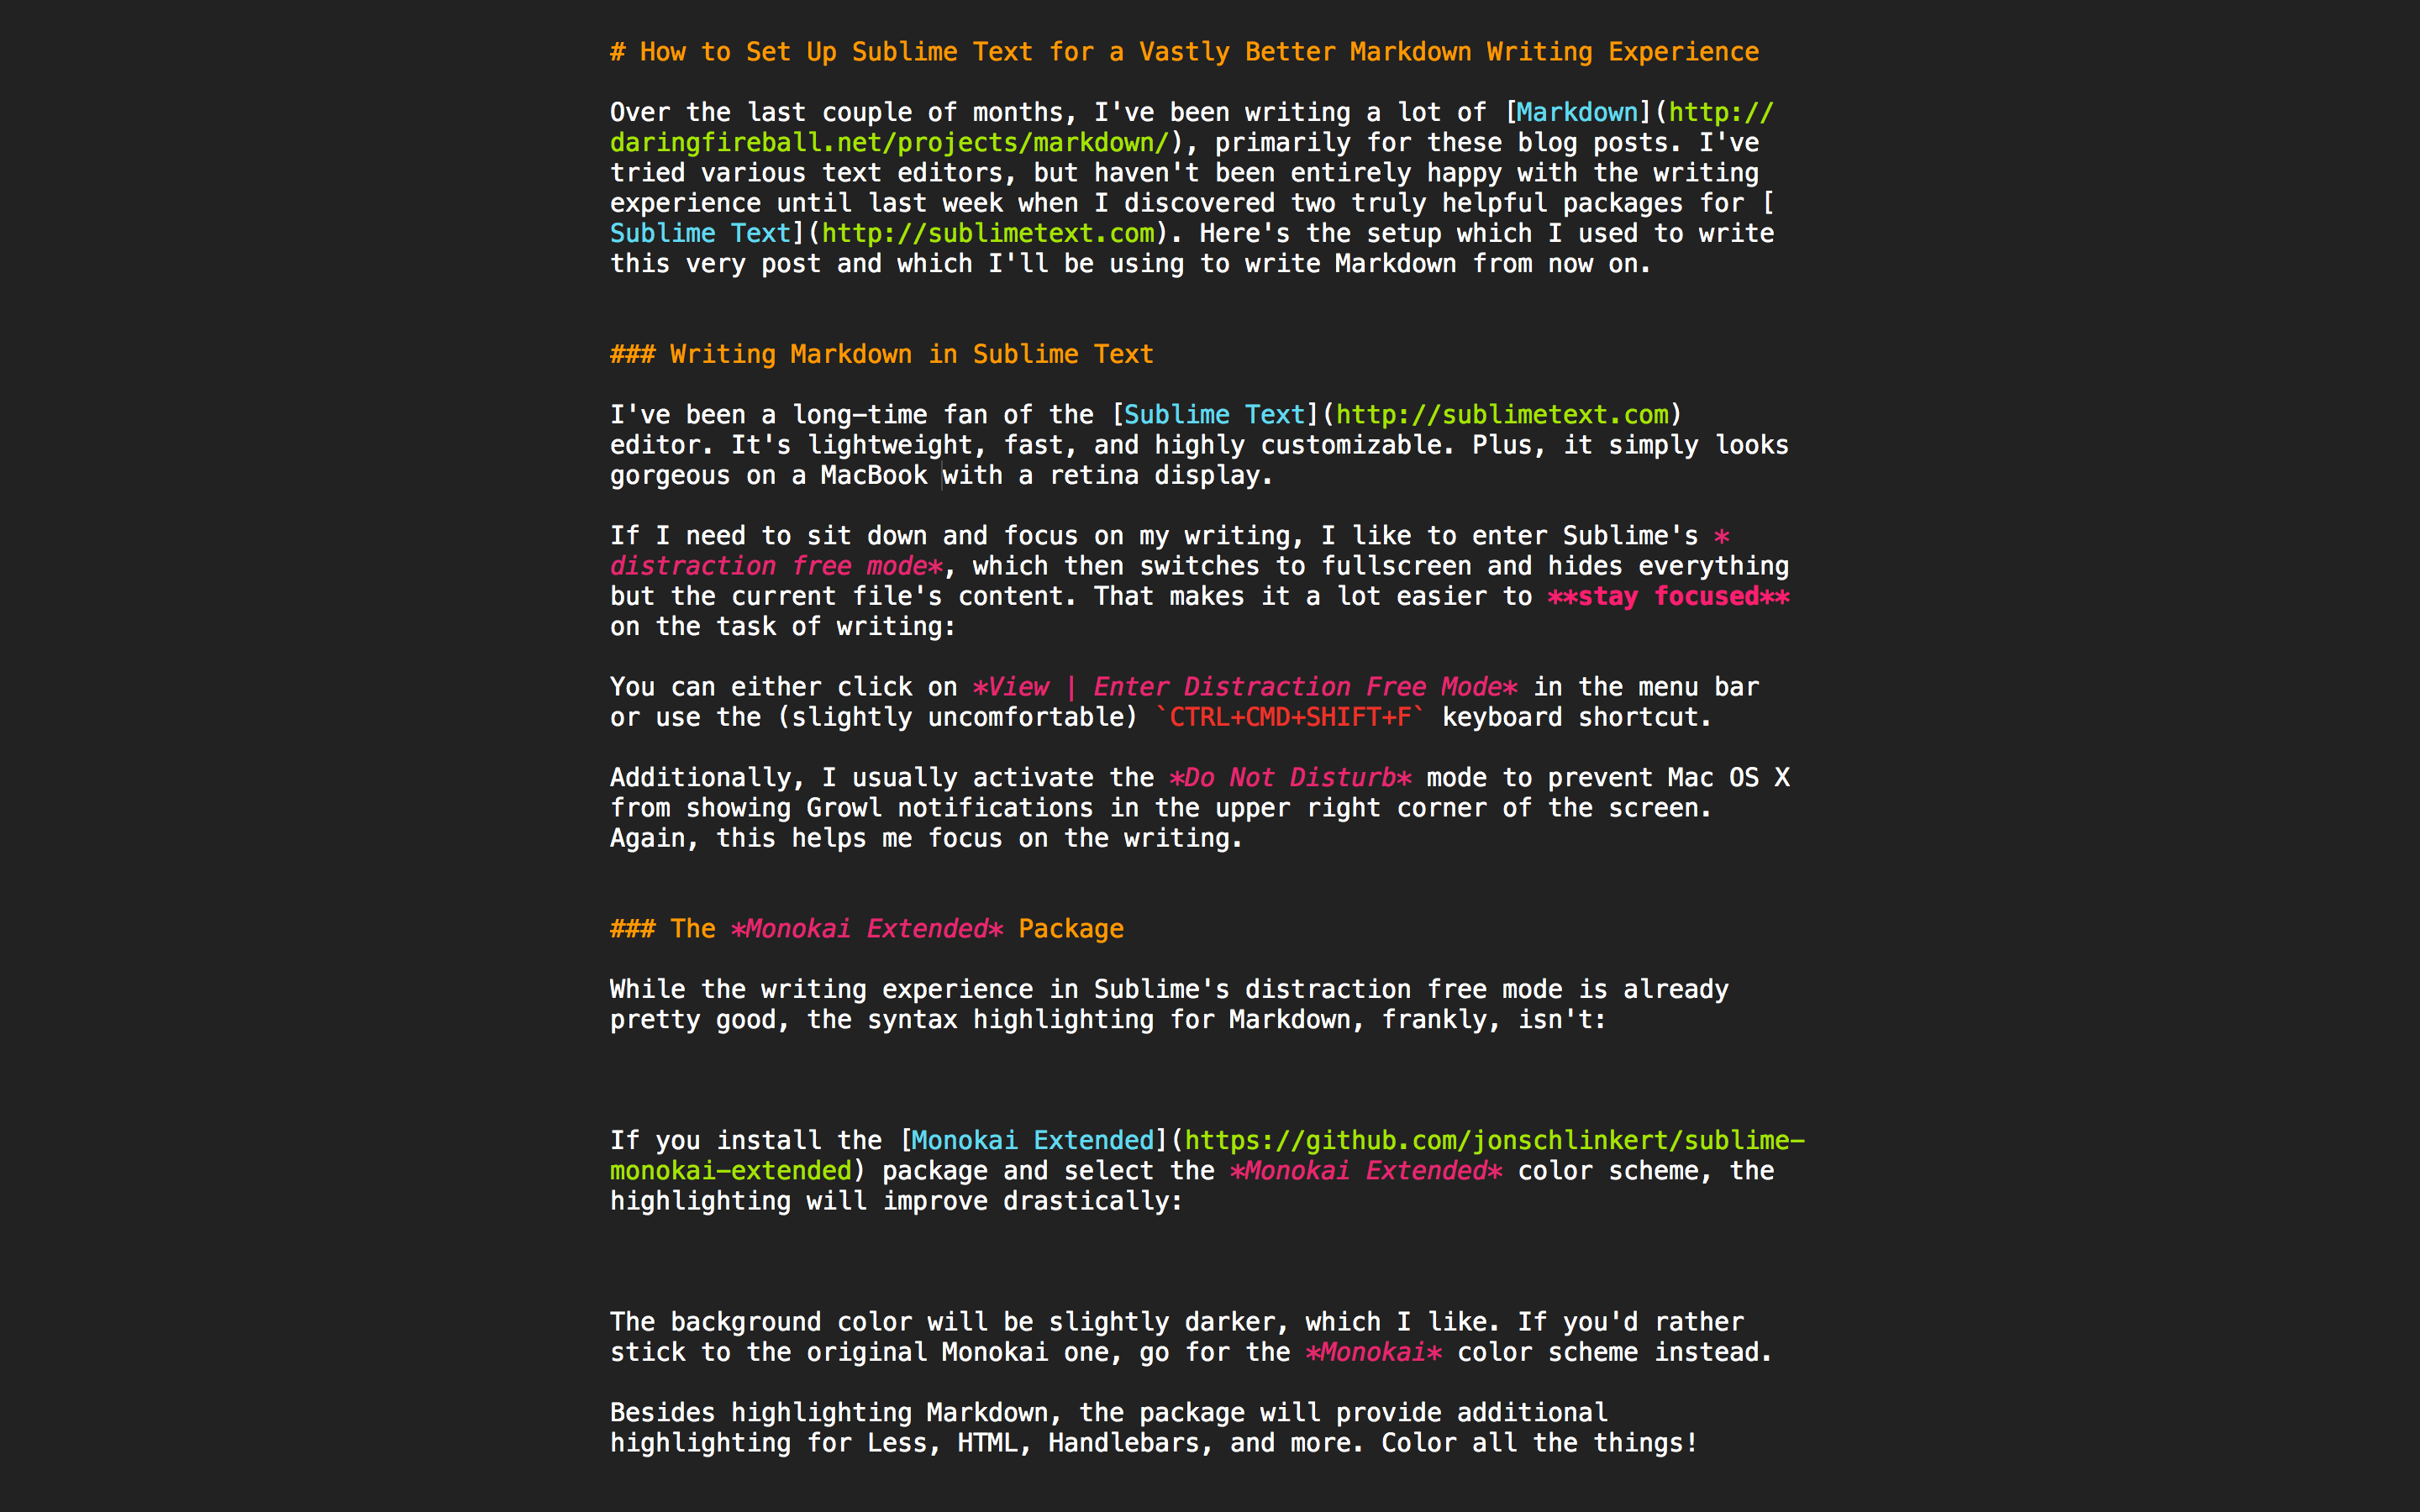 Sublime Text in Distraction Free Mode